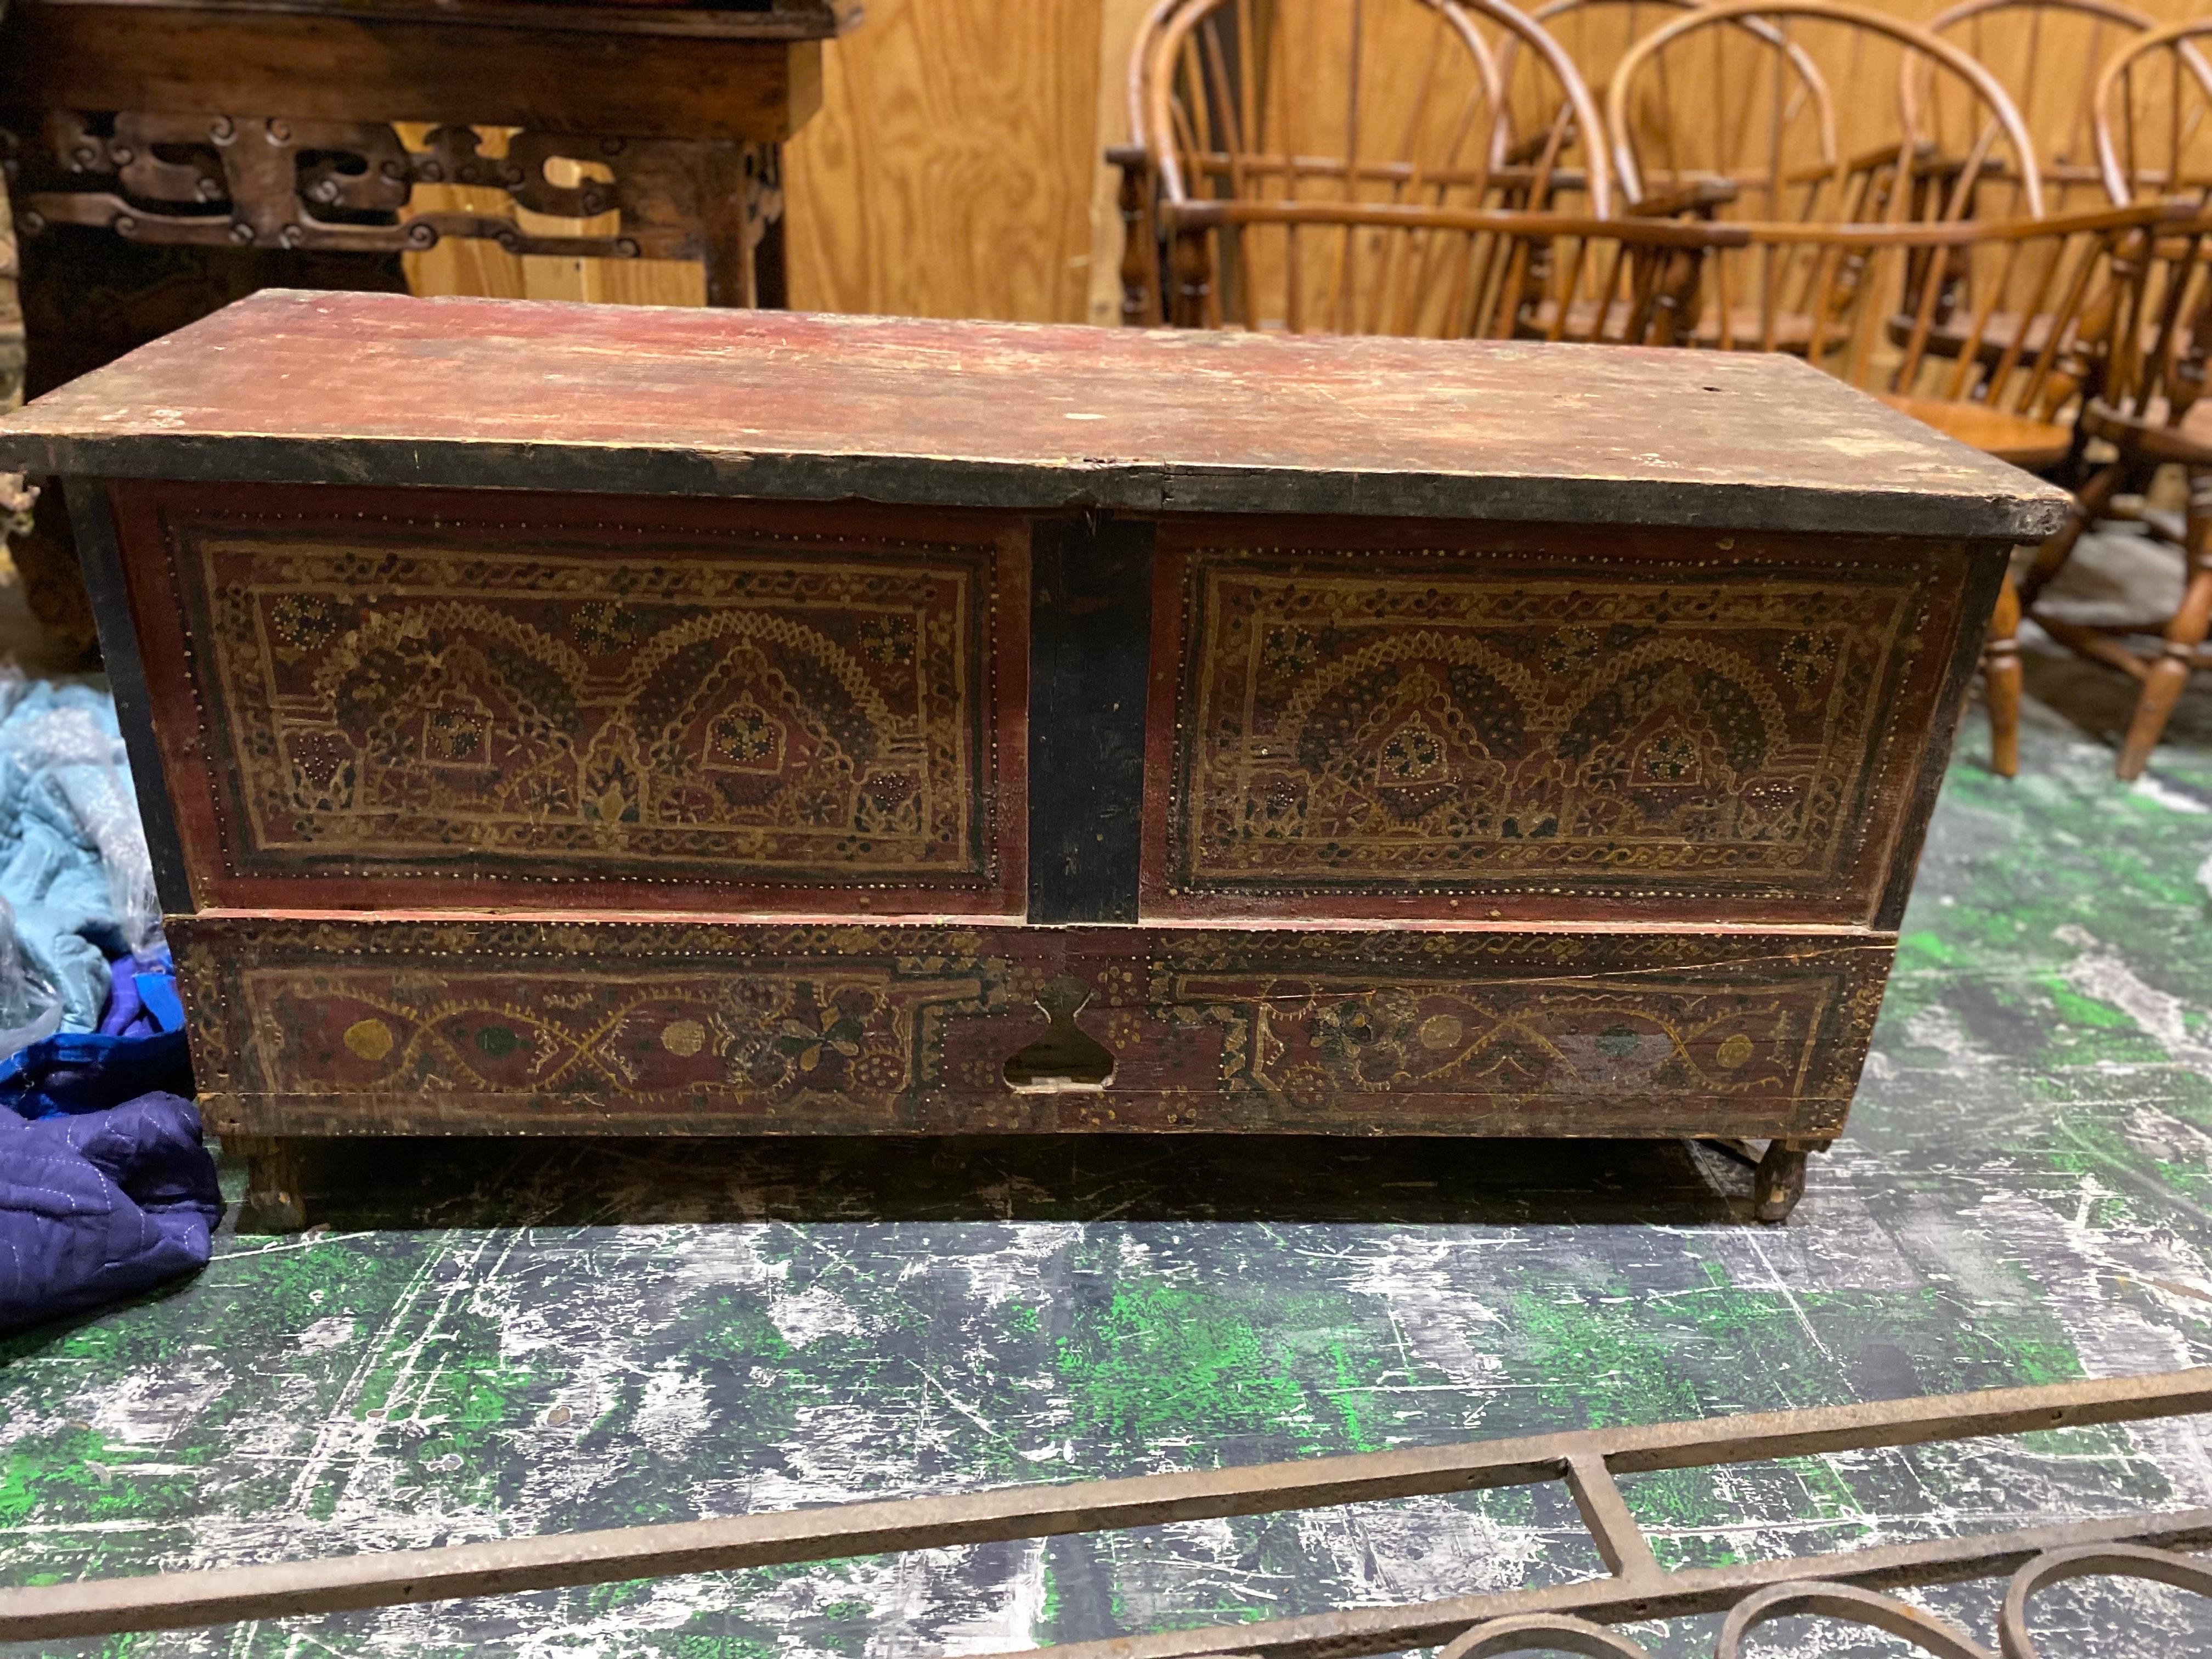 Late 19th century French red painted bench/blanket chest/trunk with elaborate decoration.
A simple wooden rectangular box construction with a worn red painted background color. Elaborate primitive decoration on front and sides of chest in green,